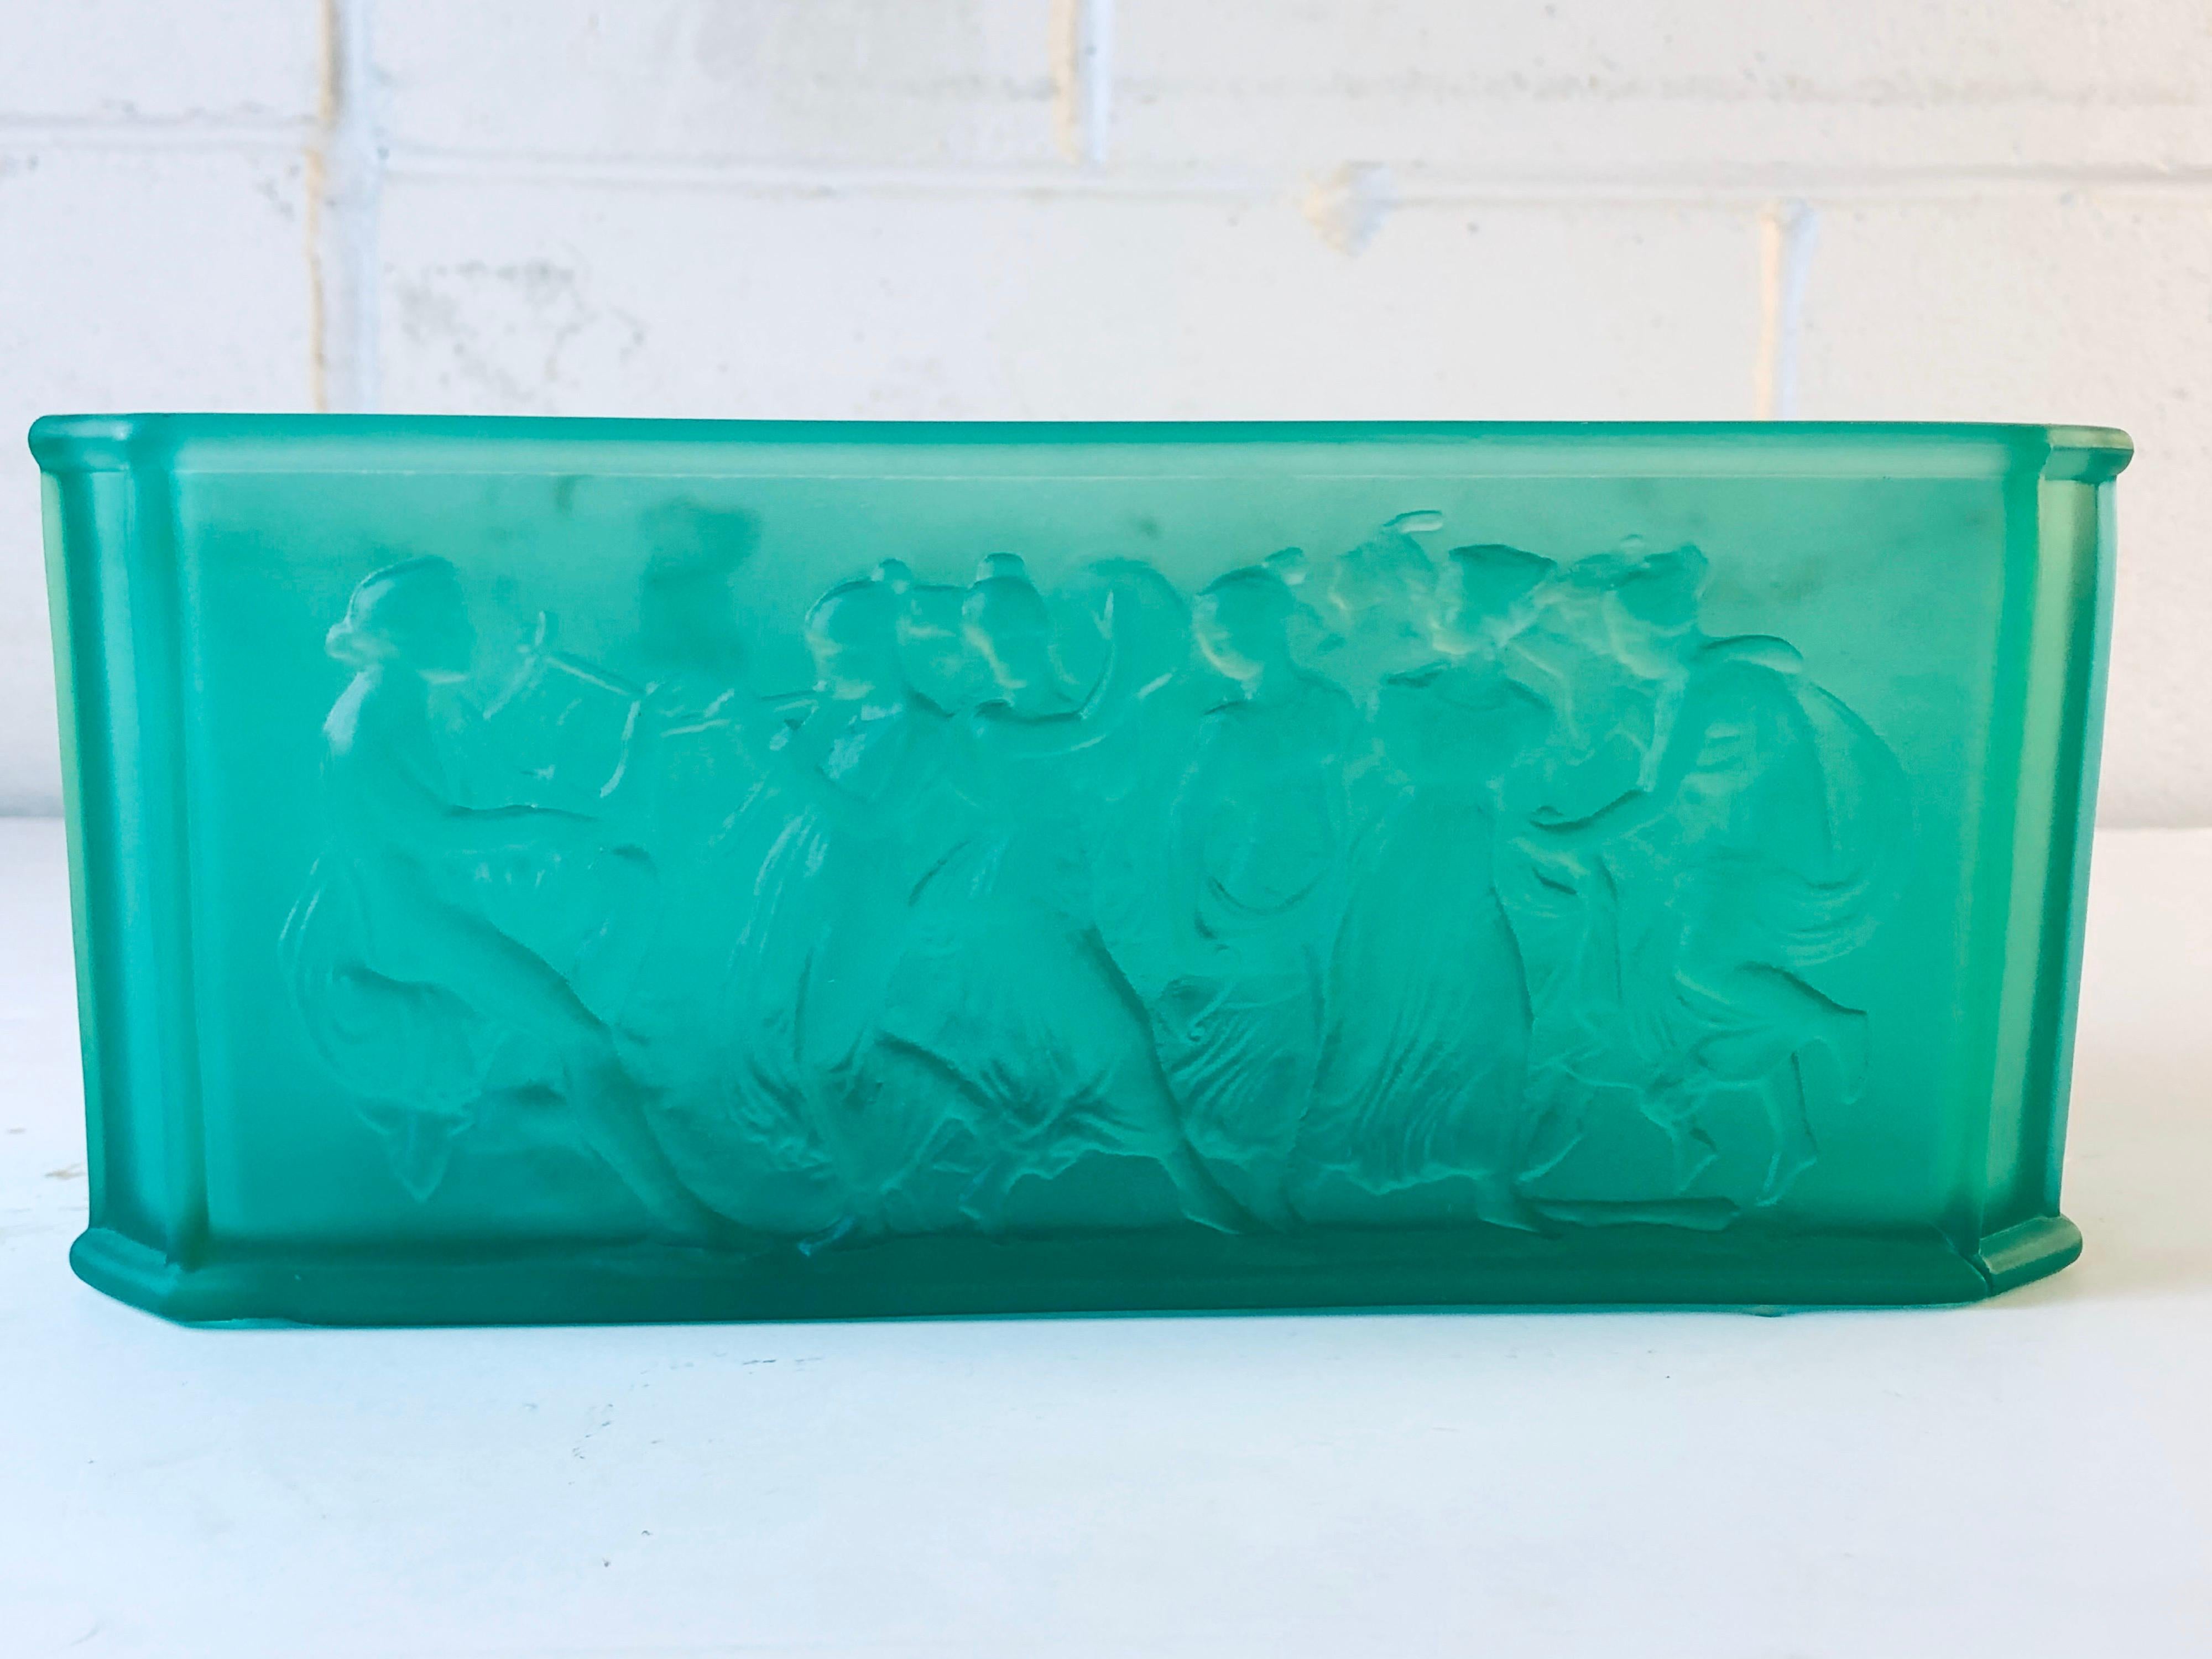 Vintage Art Deco frosted green glass rectangular vase or planter. The vase has a beautiful green color and nymph scenes all around the vase.